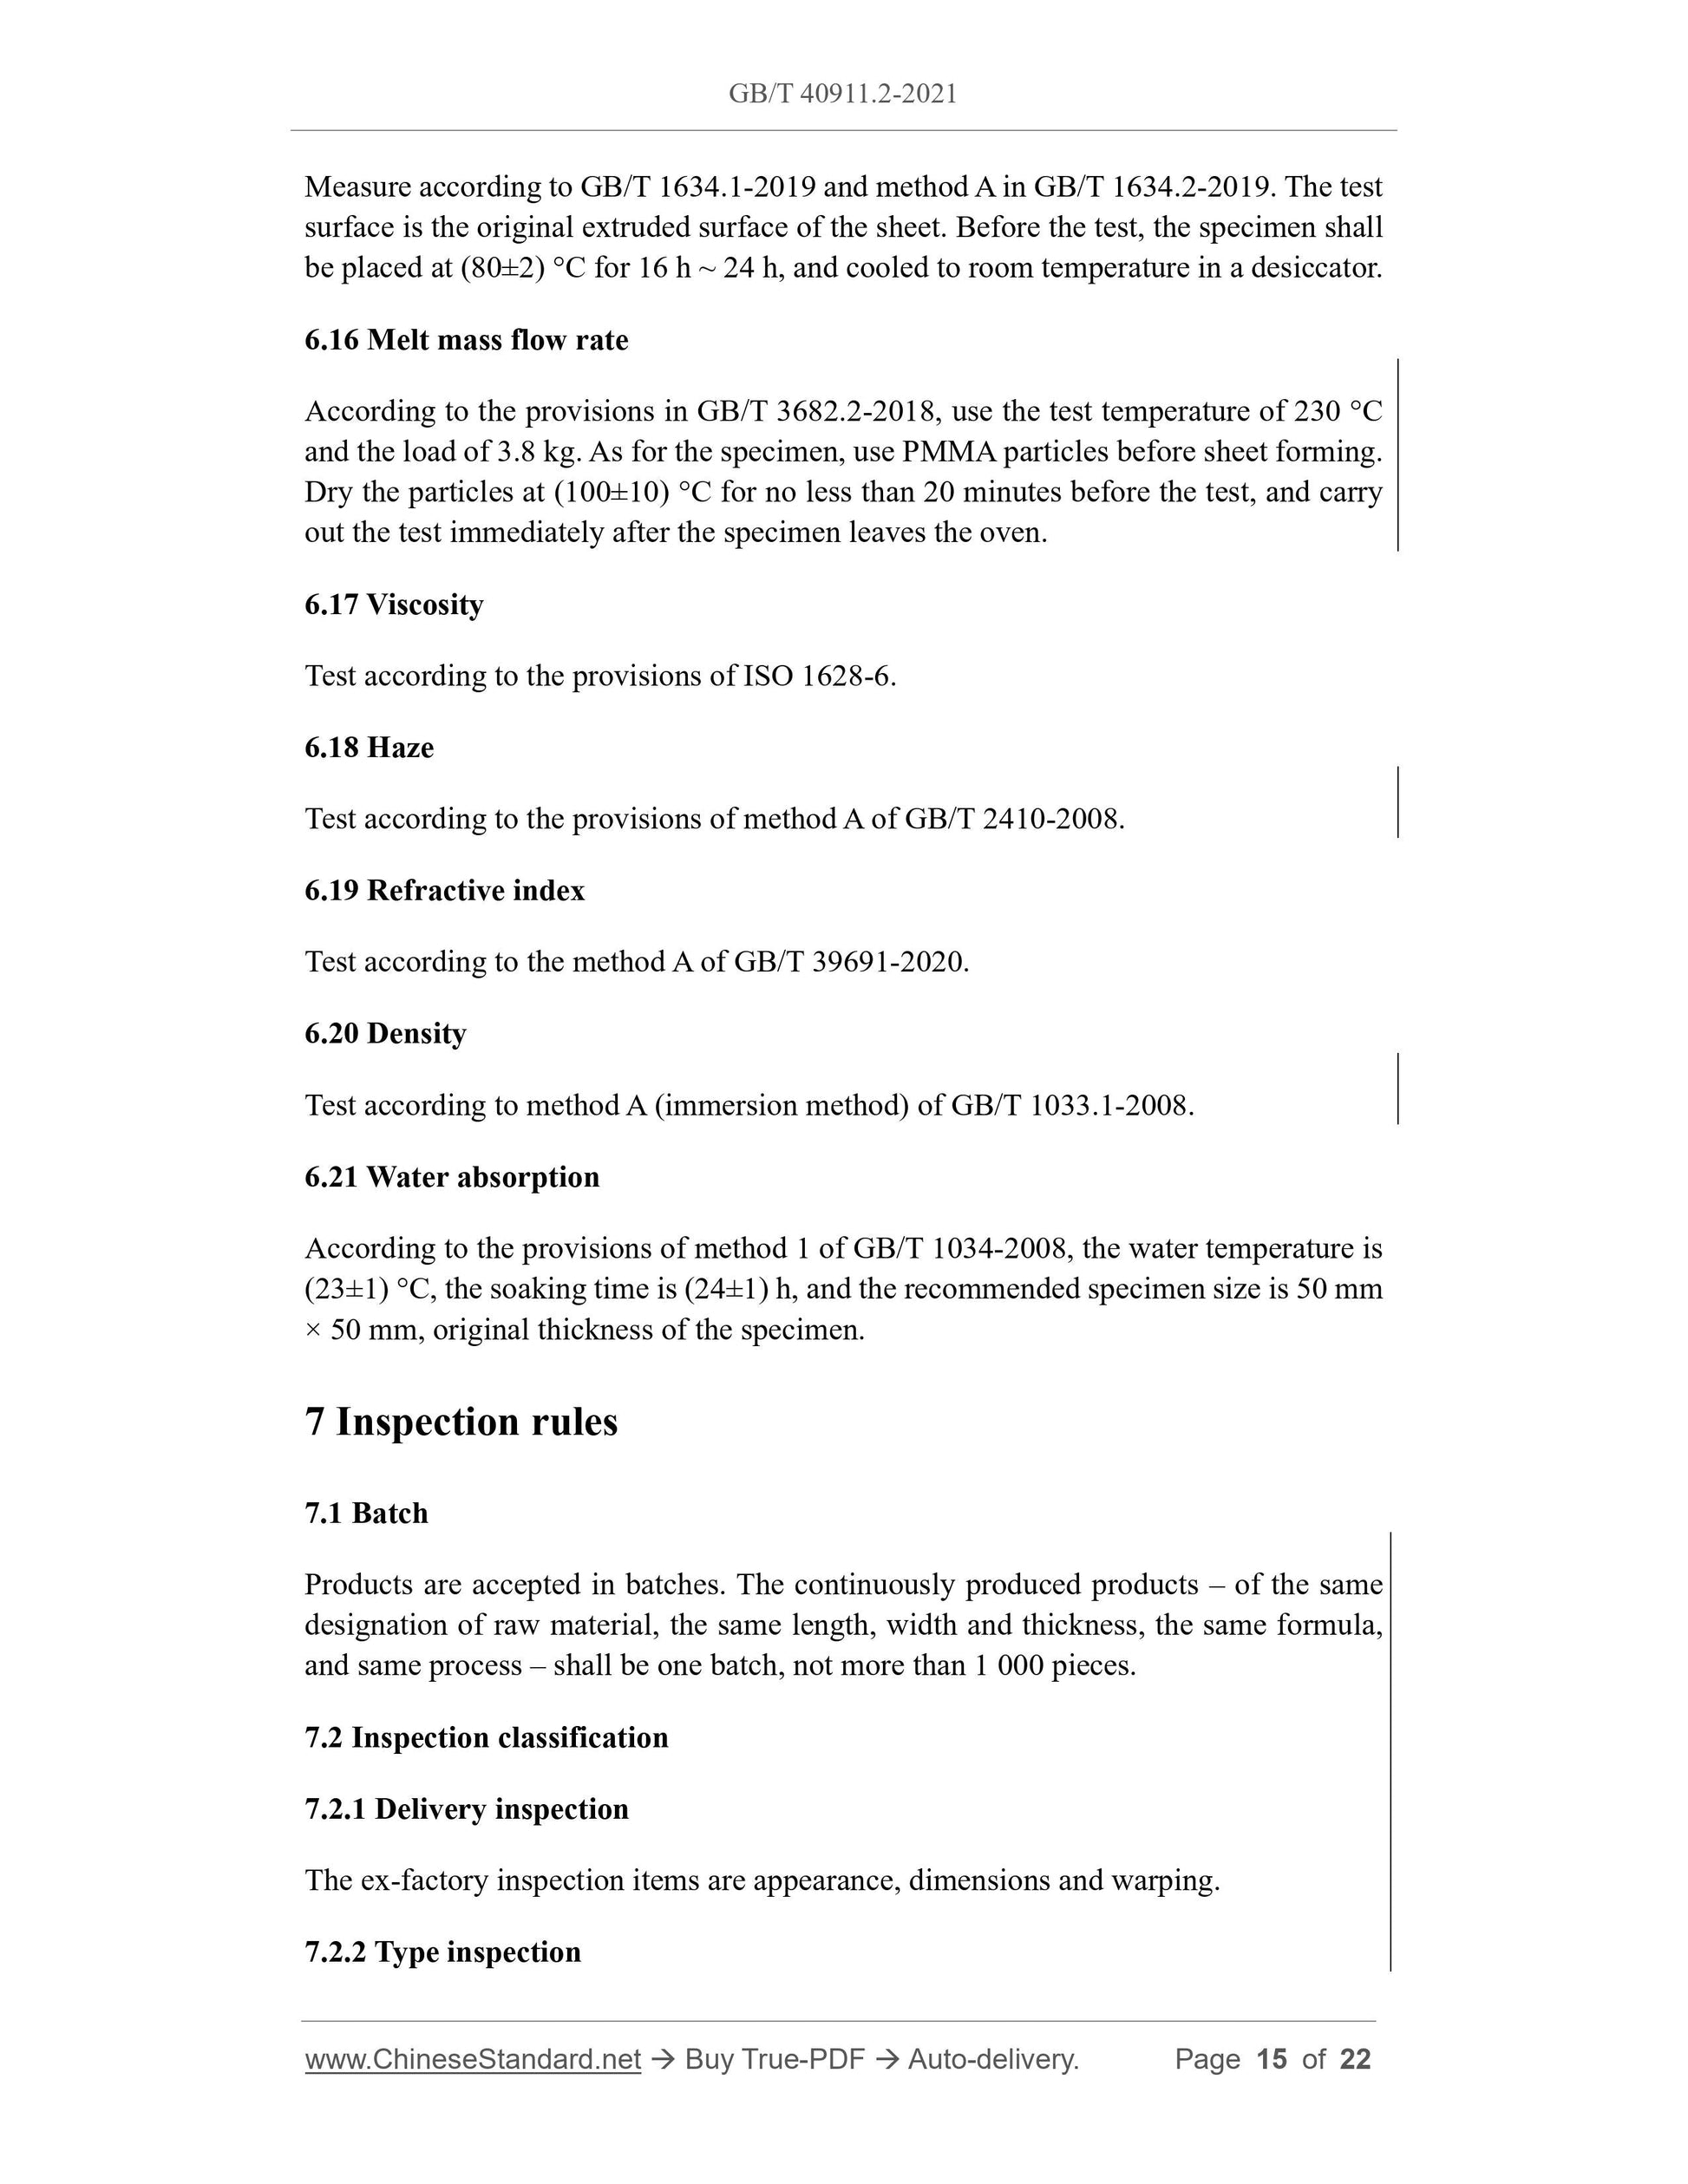 GB/T 40911.2-2021 Page 8